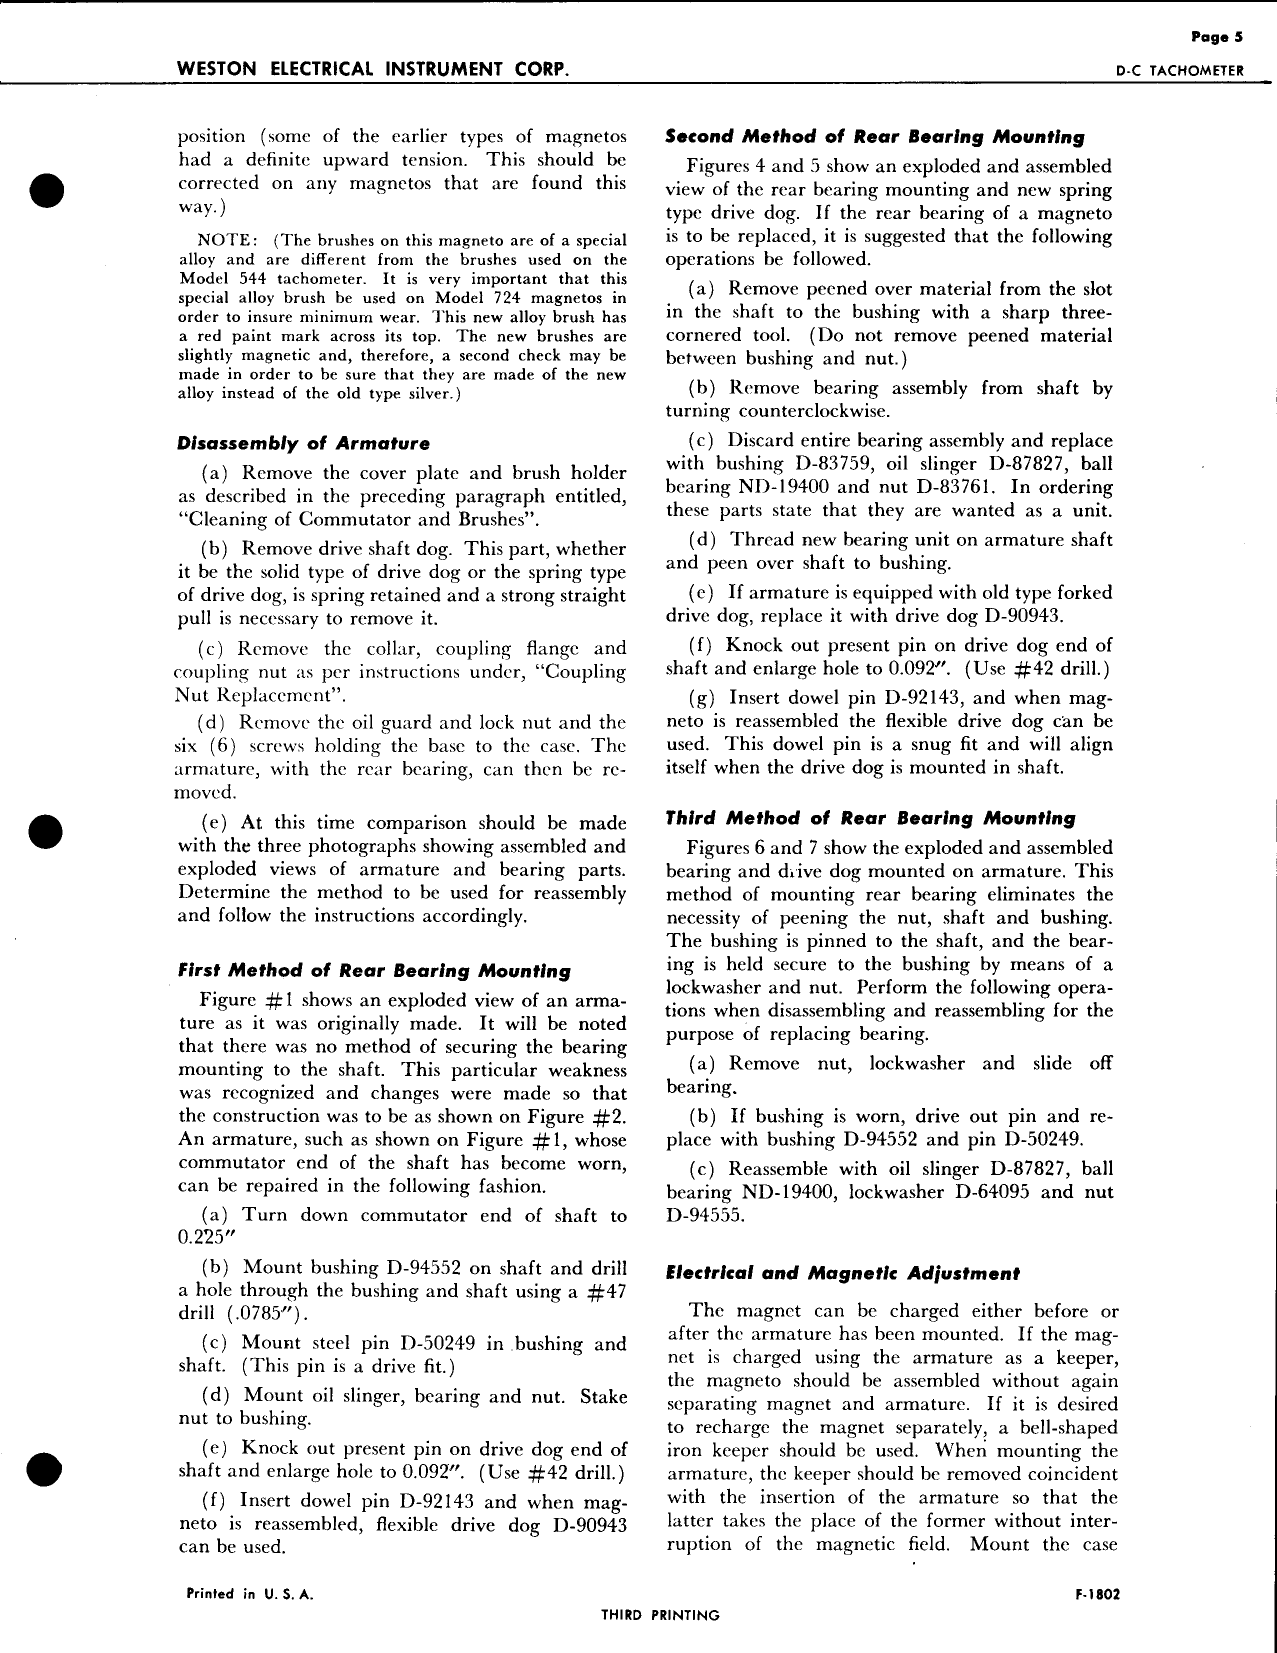 Sample page 5 from AirCorps Library document: Service Instructions for D-C Tachometer 724 Mag & 545 Indicator